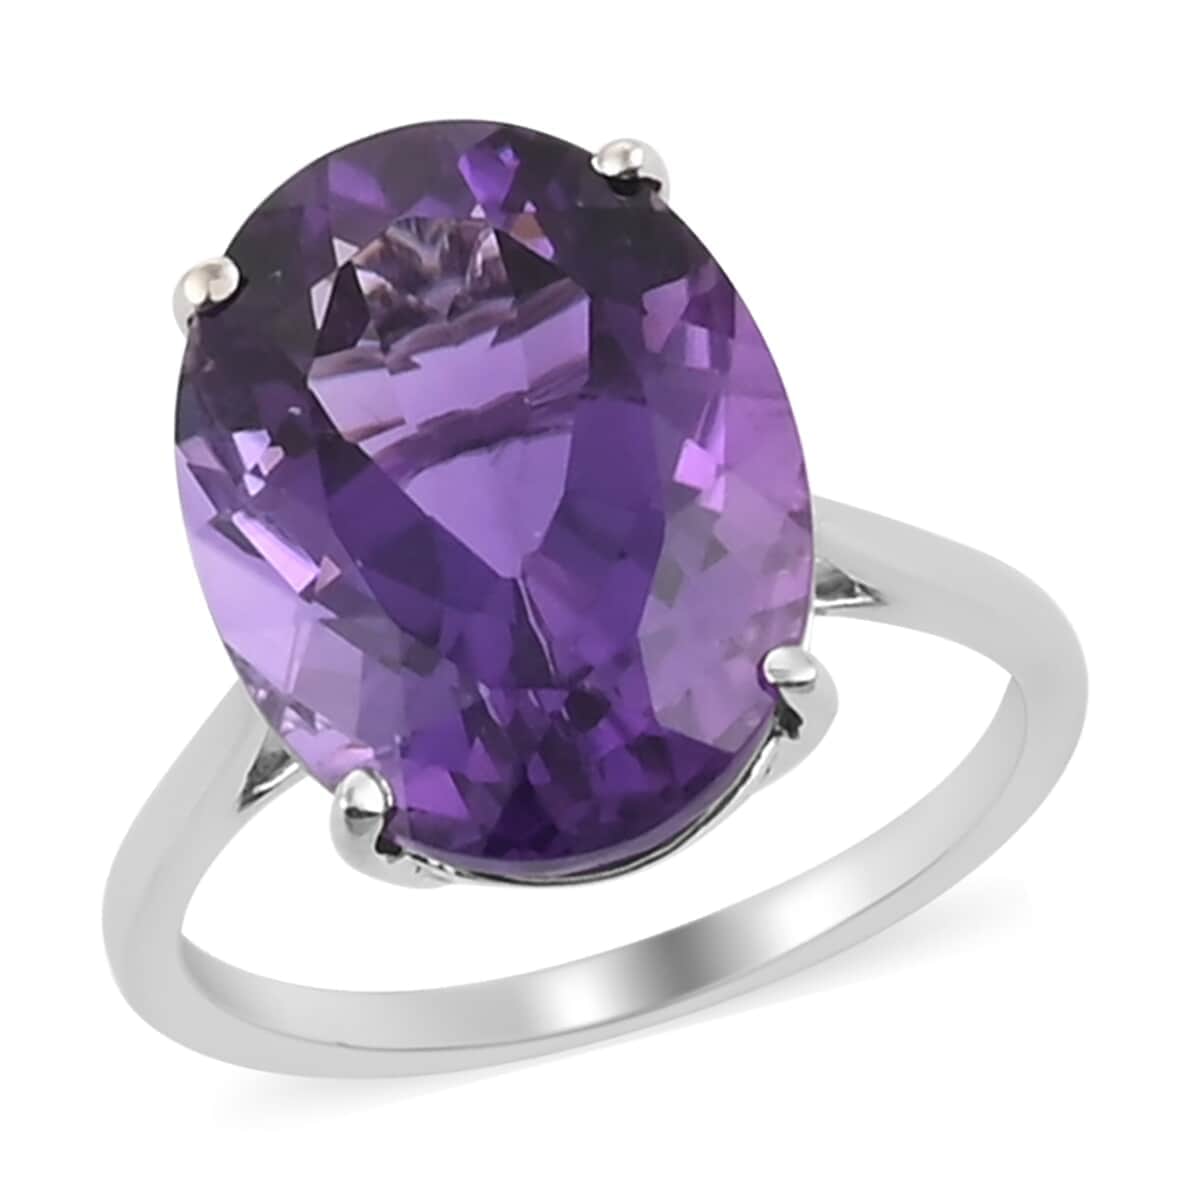 LUXORO 10K White Gold AAA Lusaka Amethyst Solitaire Ring (2.75 g) 9.15 ctw image number 0